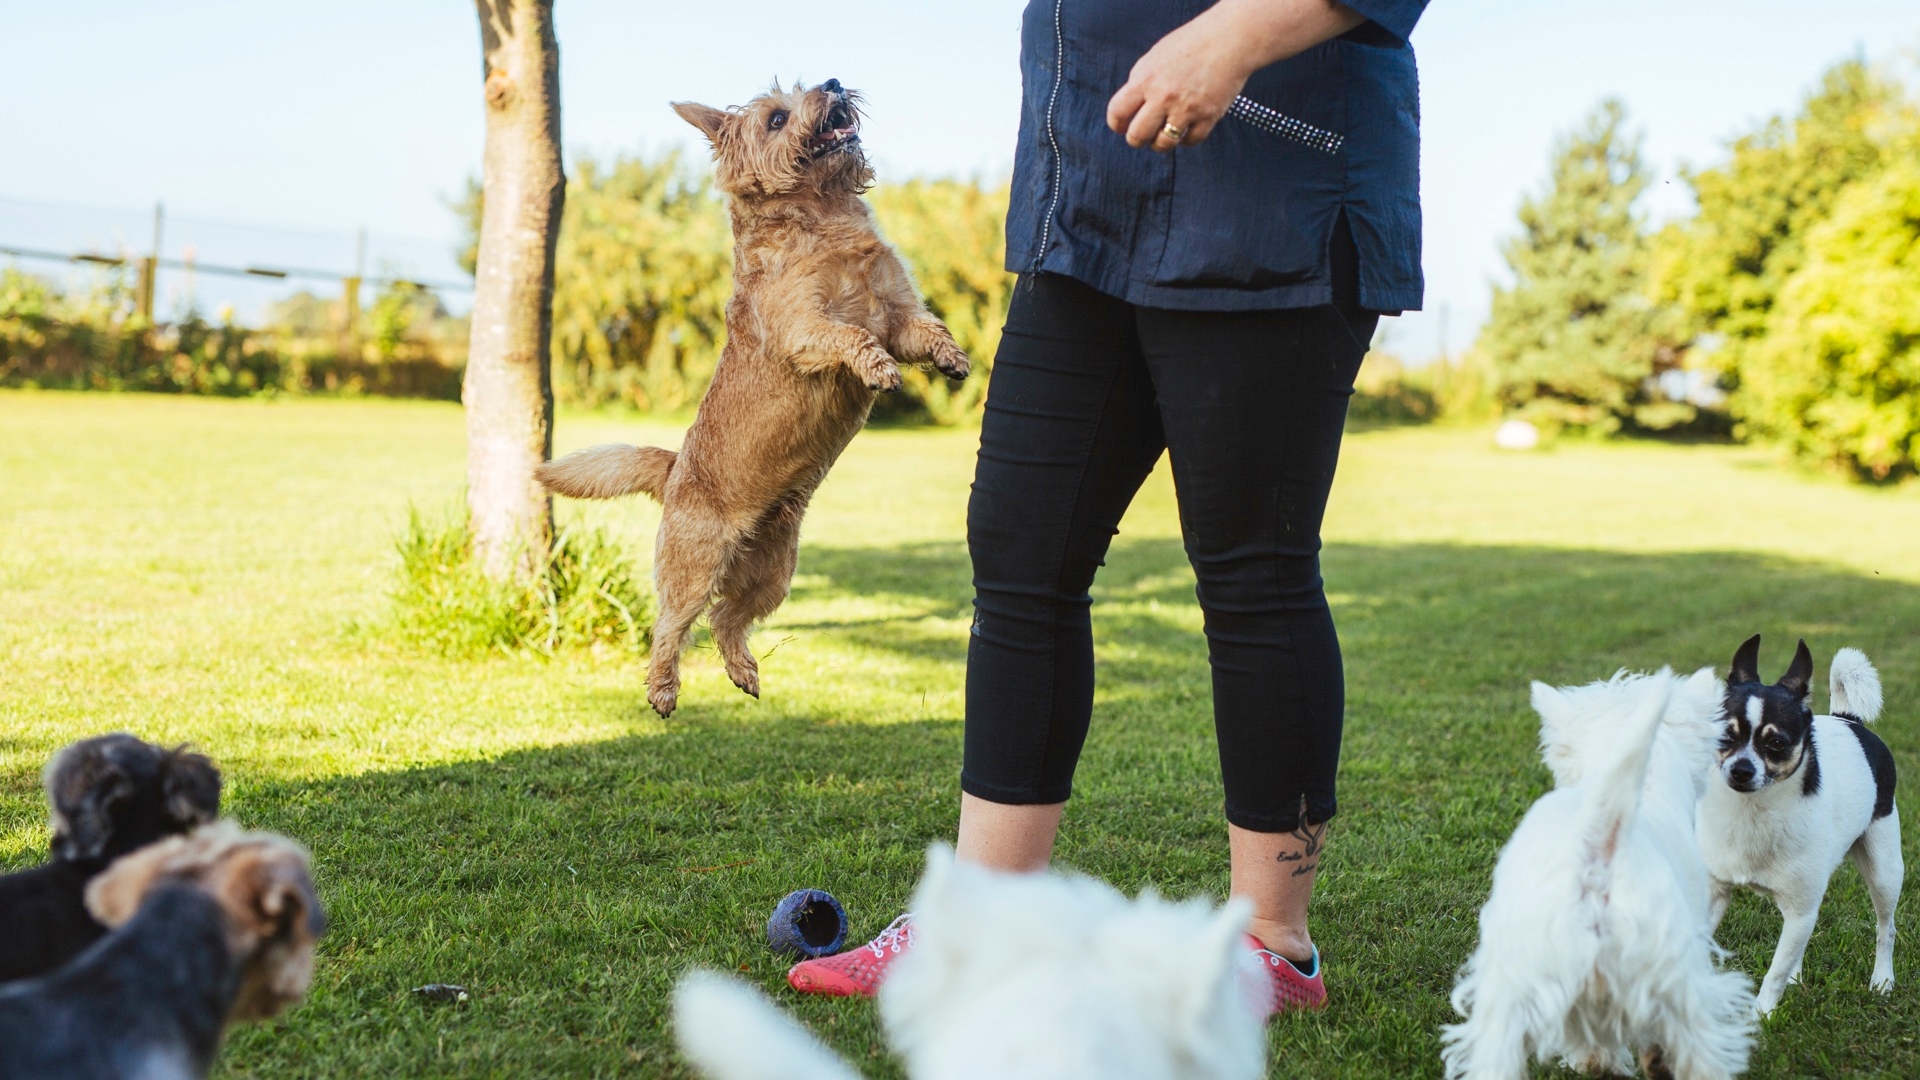 Disease Risks For People At Dog Social Events